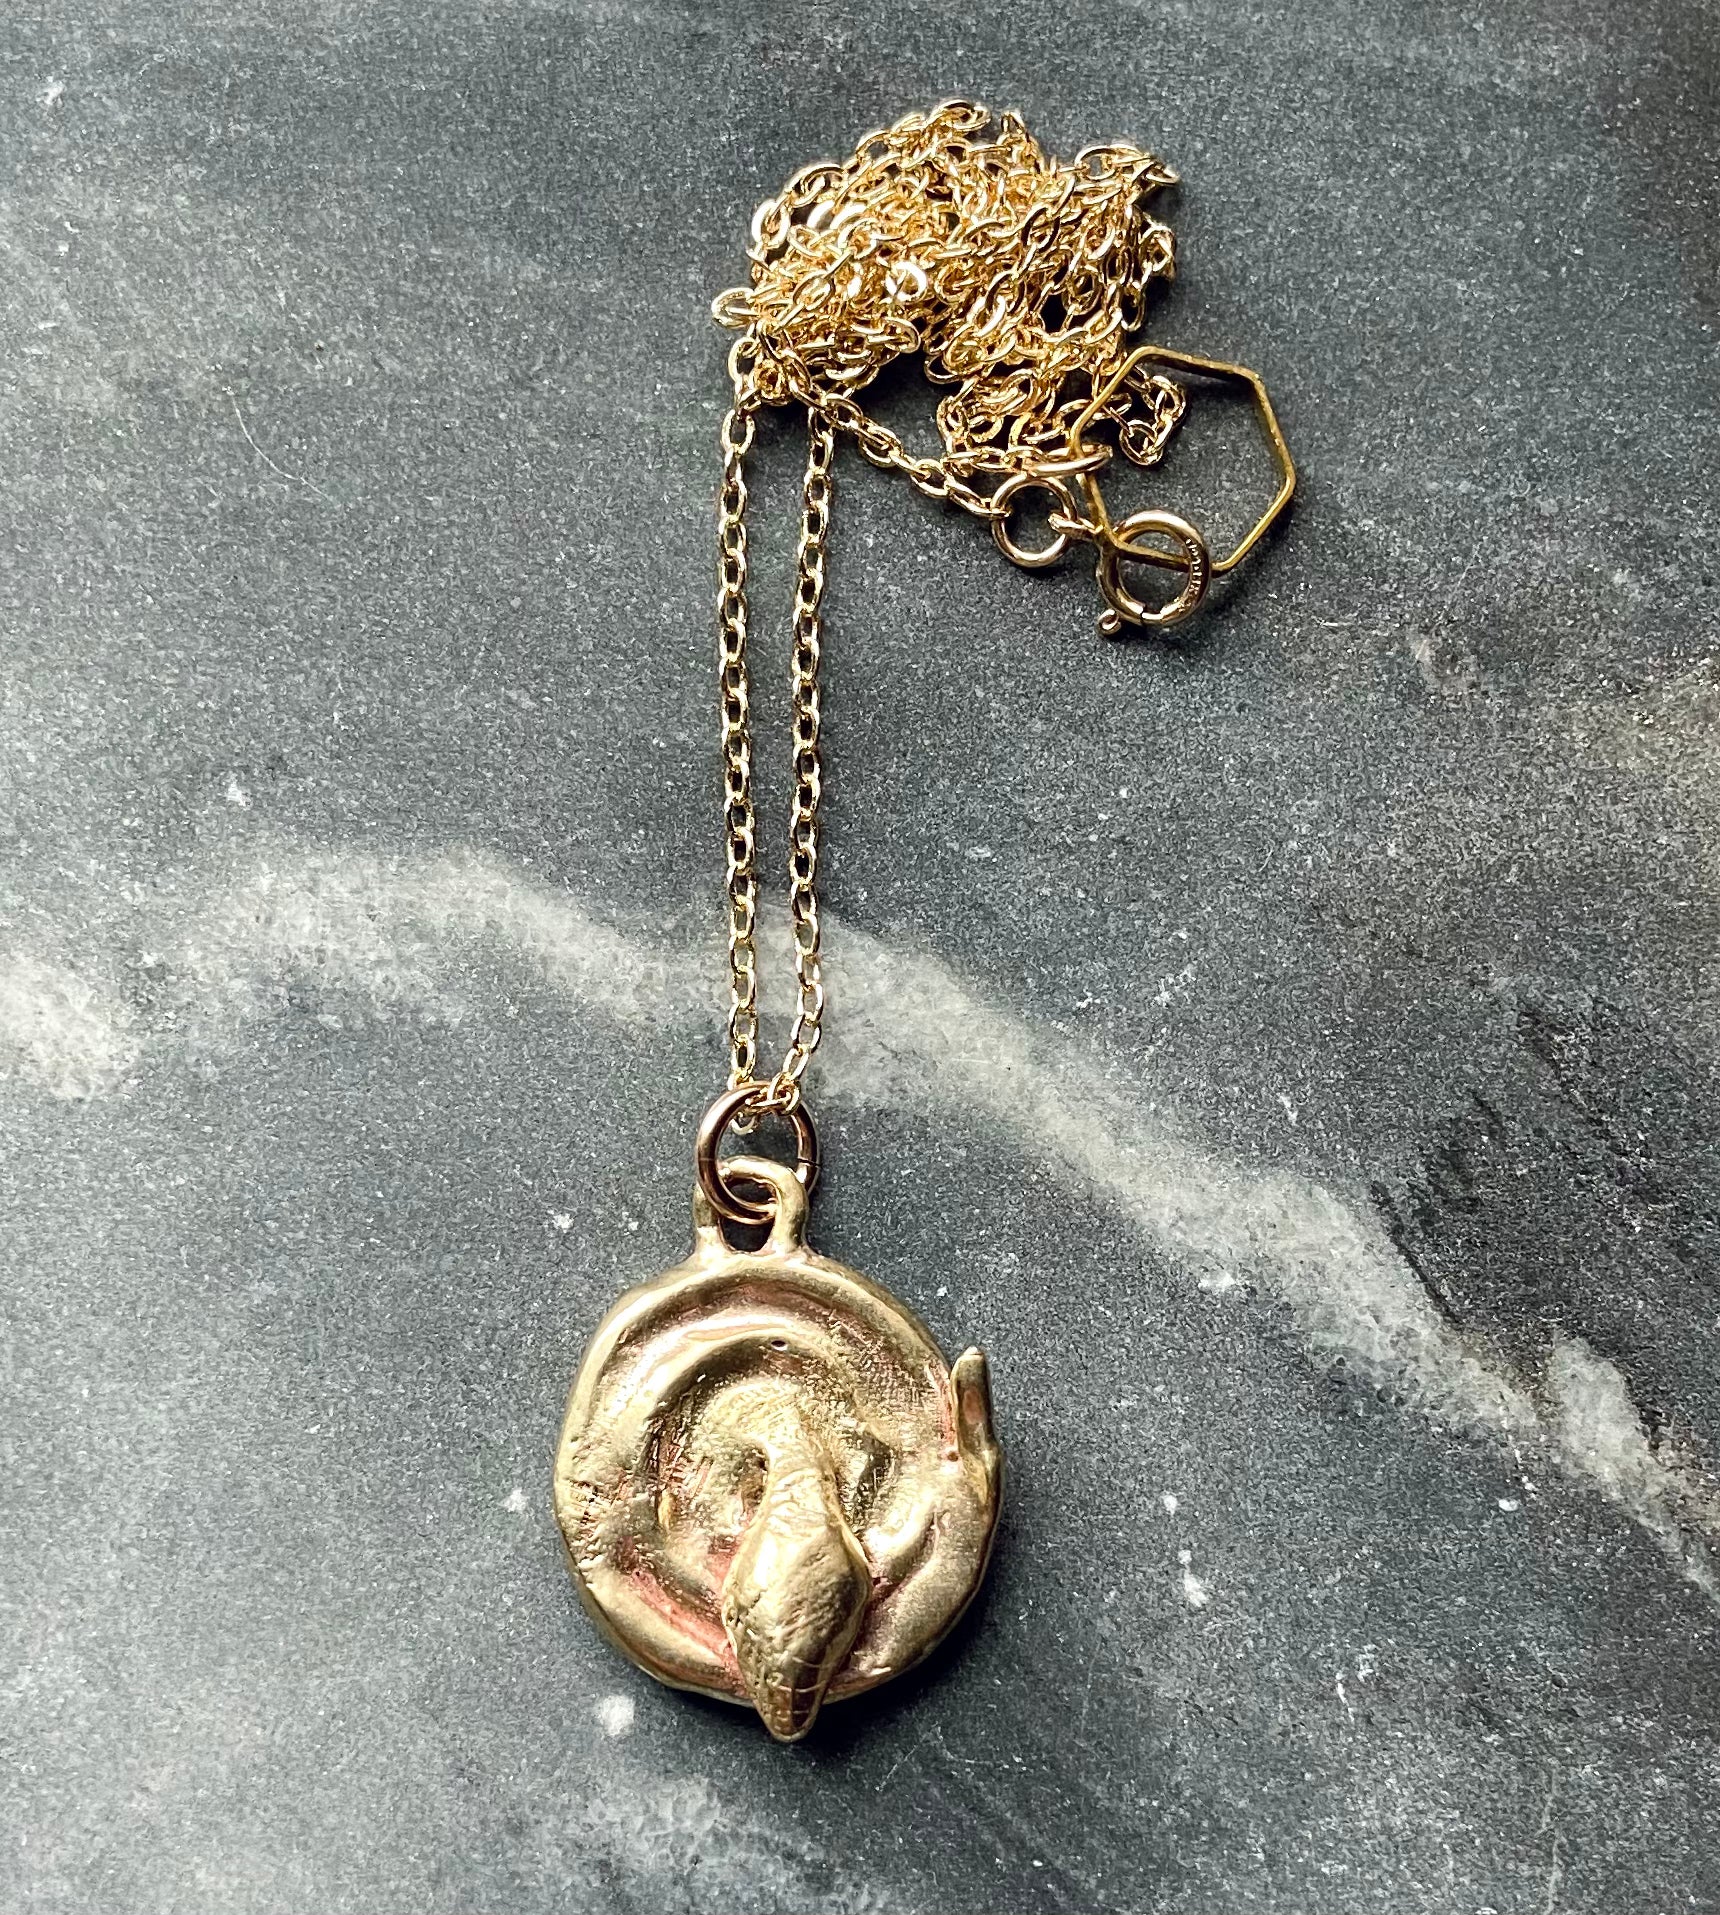 serpentine handmade hand carved lost wax cast brass witchy snake talisman charm necklace